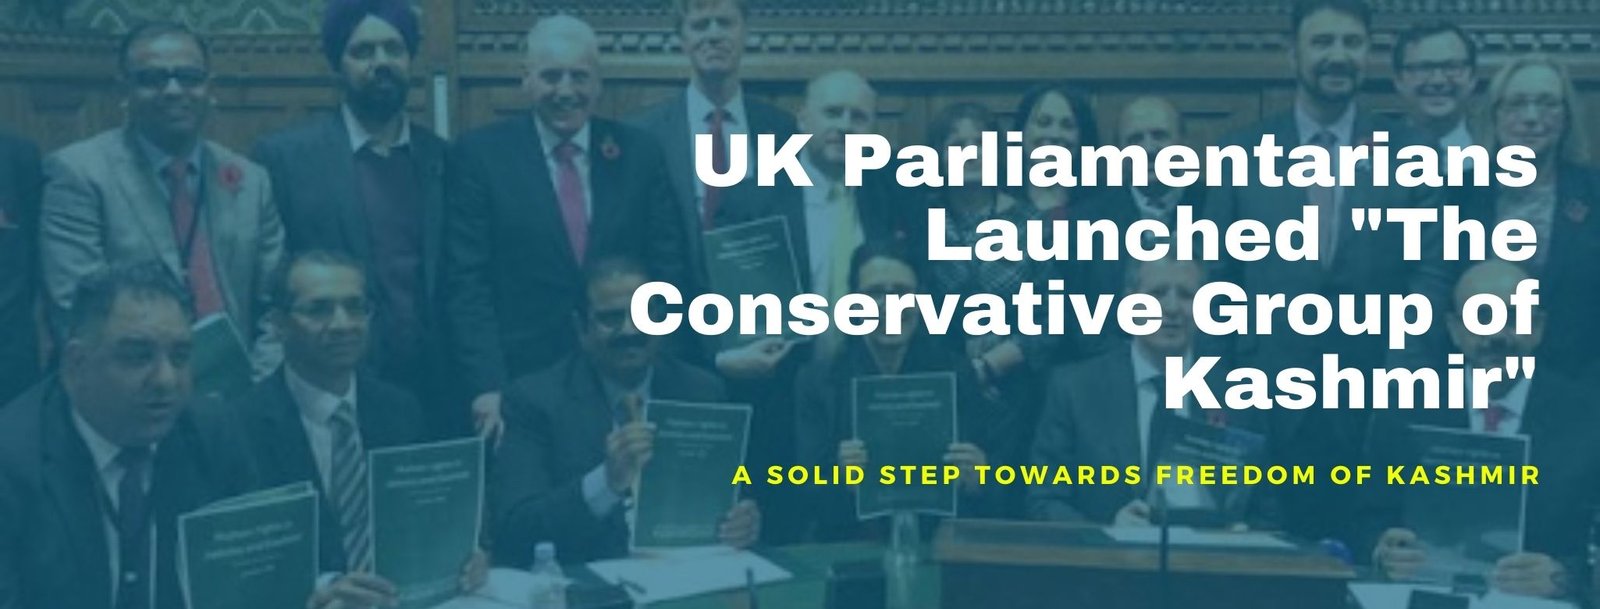 UK Parliamentarians Launched The Conservative Group of Kashmir